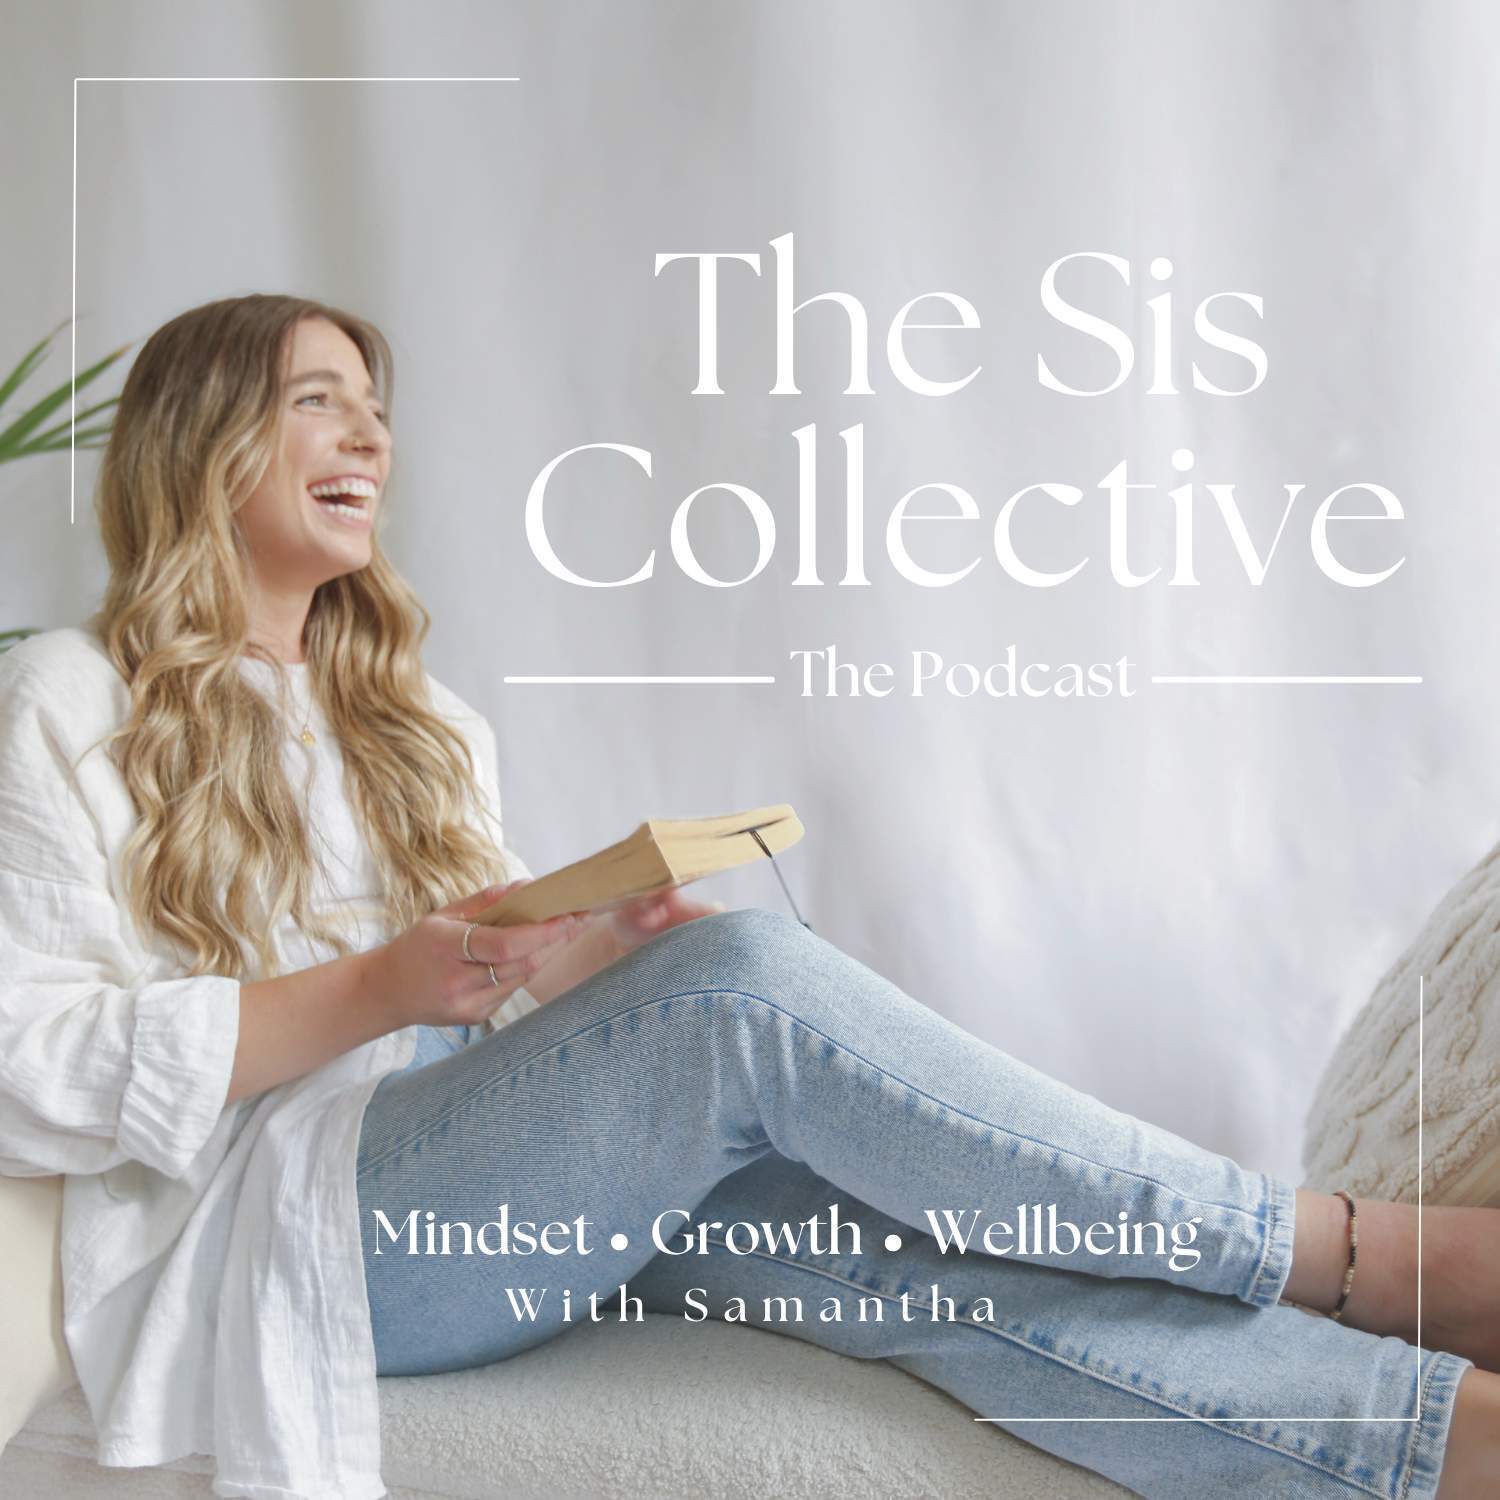 The Sis Collective The Podcast | She Is Samantha